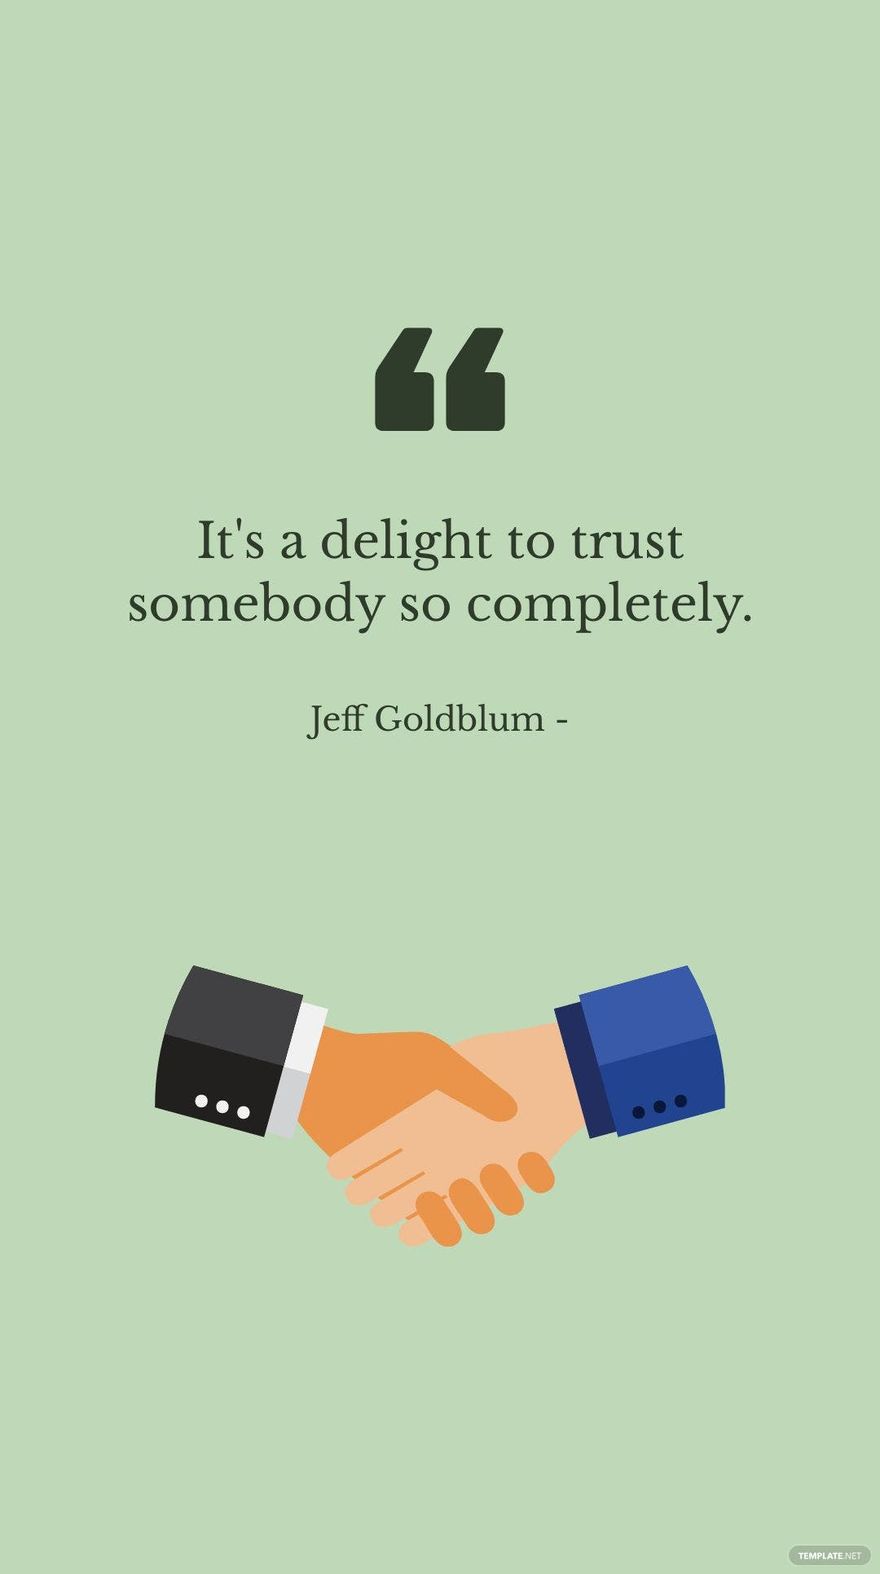 Jeff Goldblum - It's a delight to trust somebody so completely. in JPG